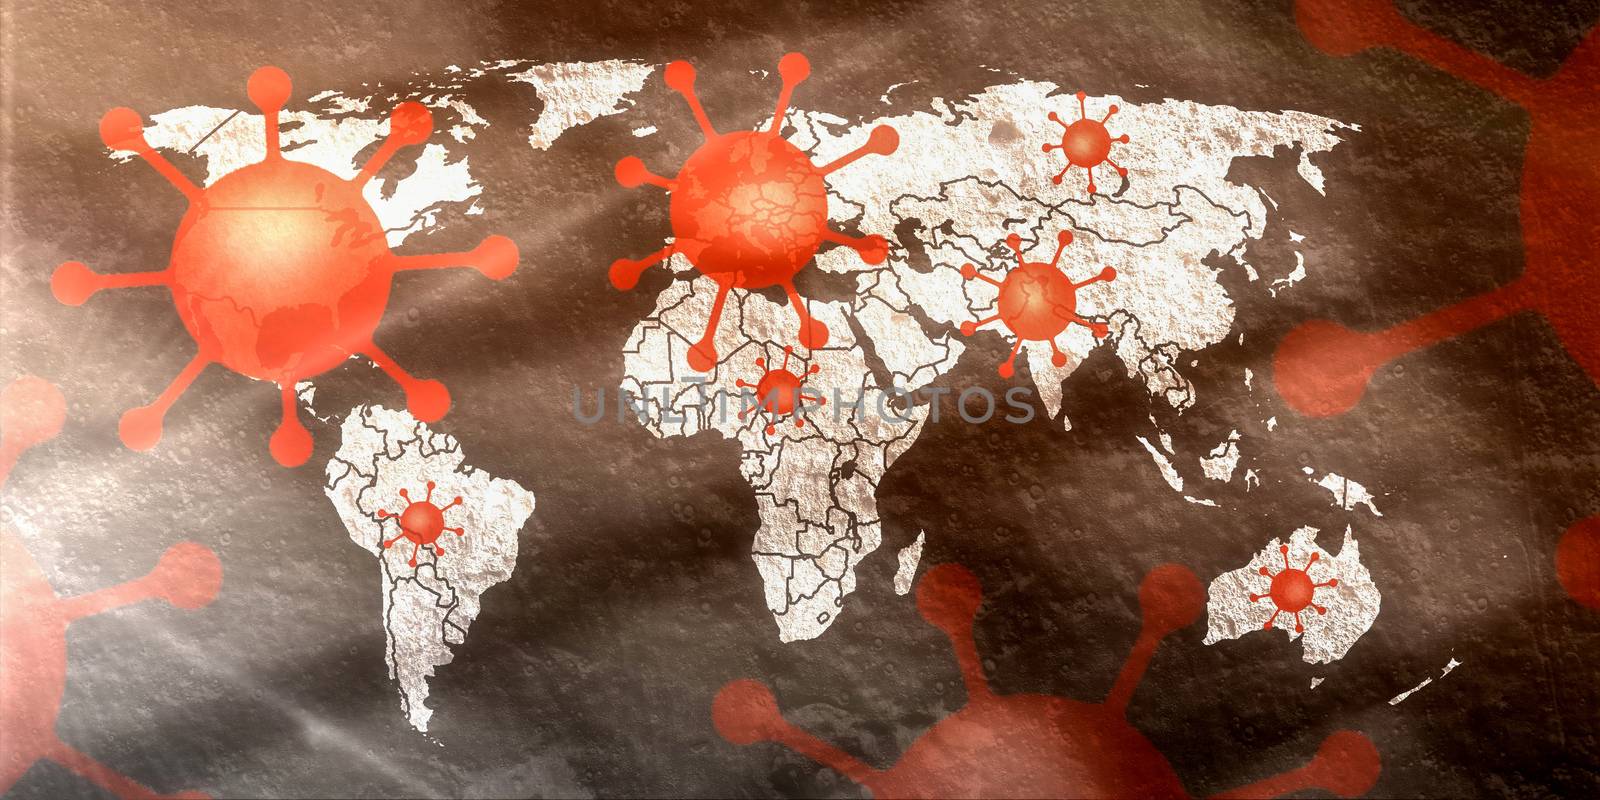 3D-Illustration of a world map showing the corona virus covid-19 hotspots in the United States and Europe.